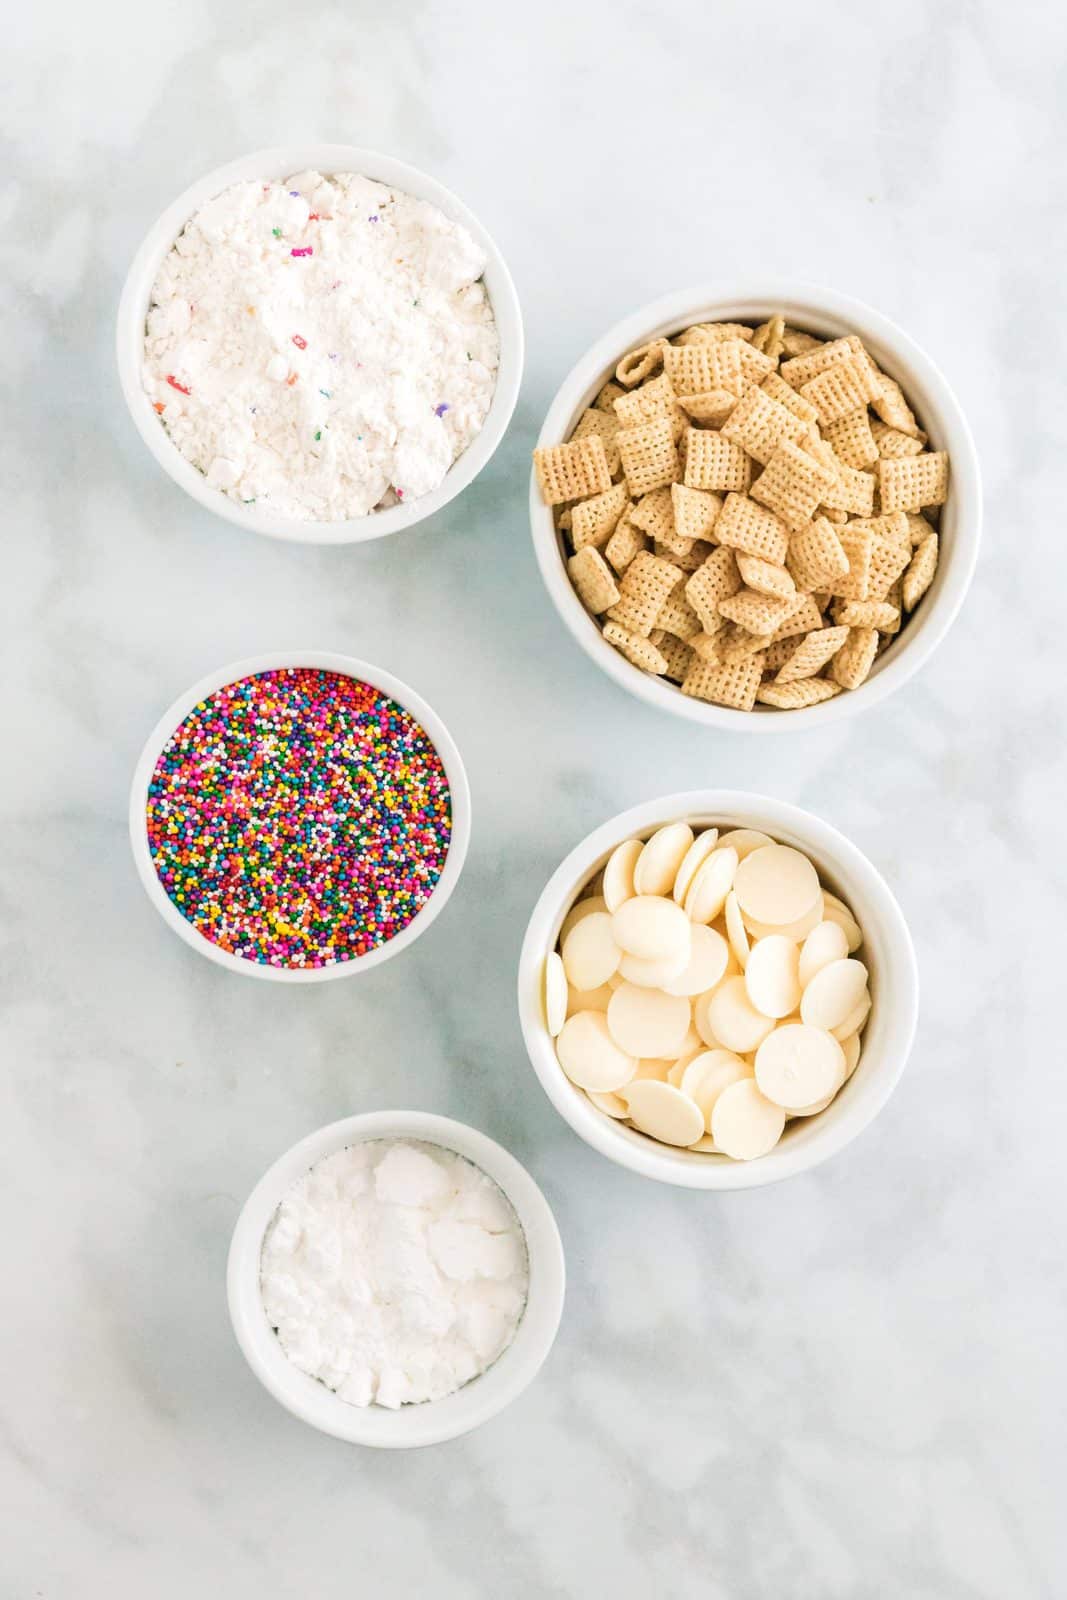 Ingredients needed: rice chex cereal, white candy melts, sprinkles, funfetti cake mix and powdered sugar.